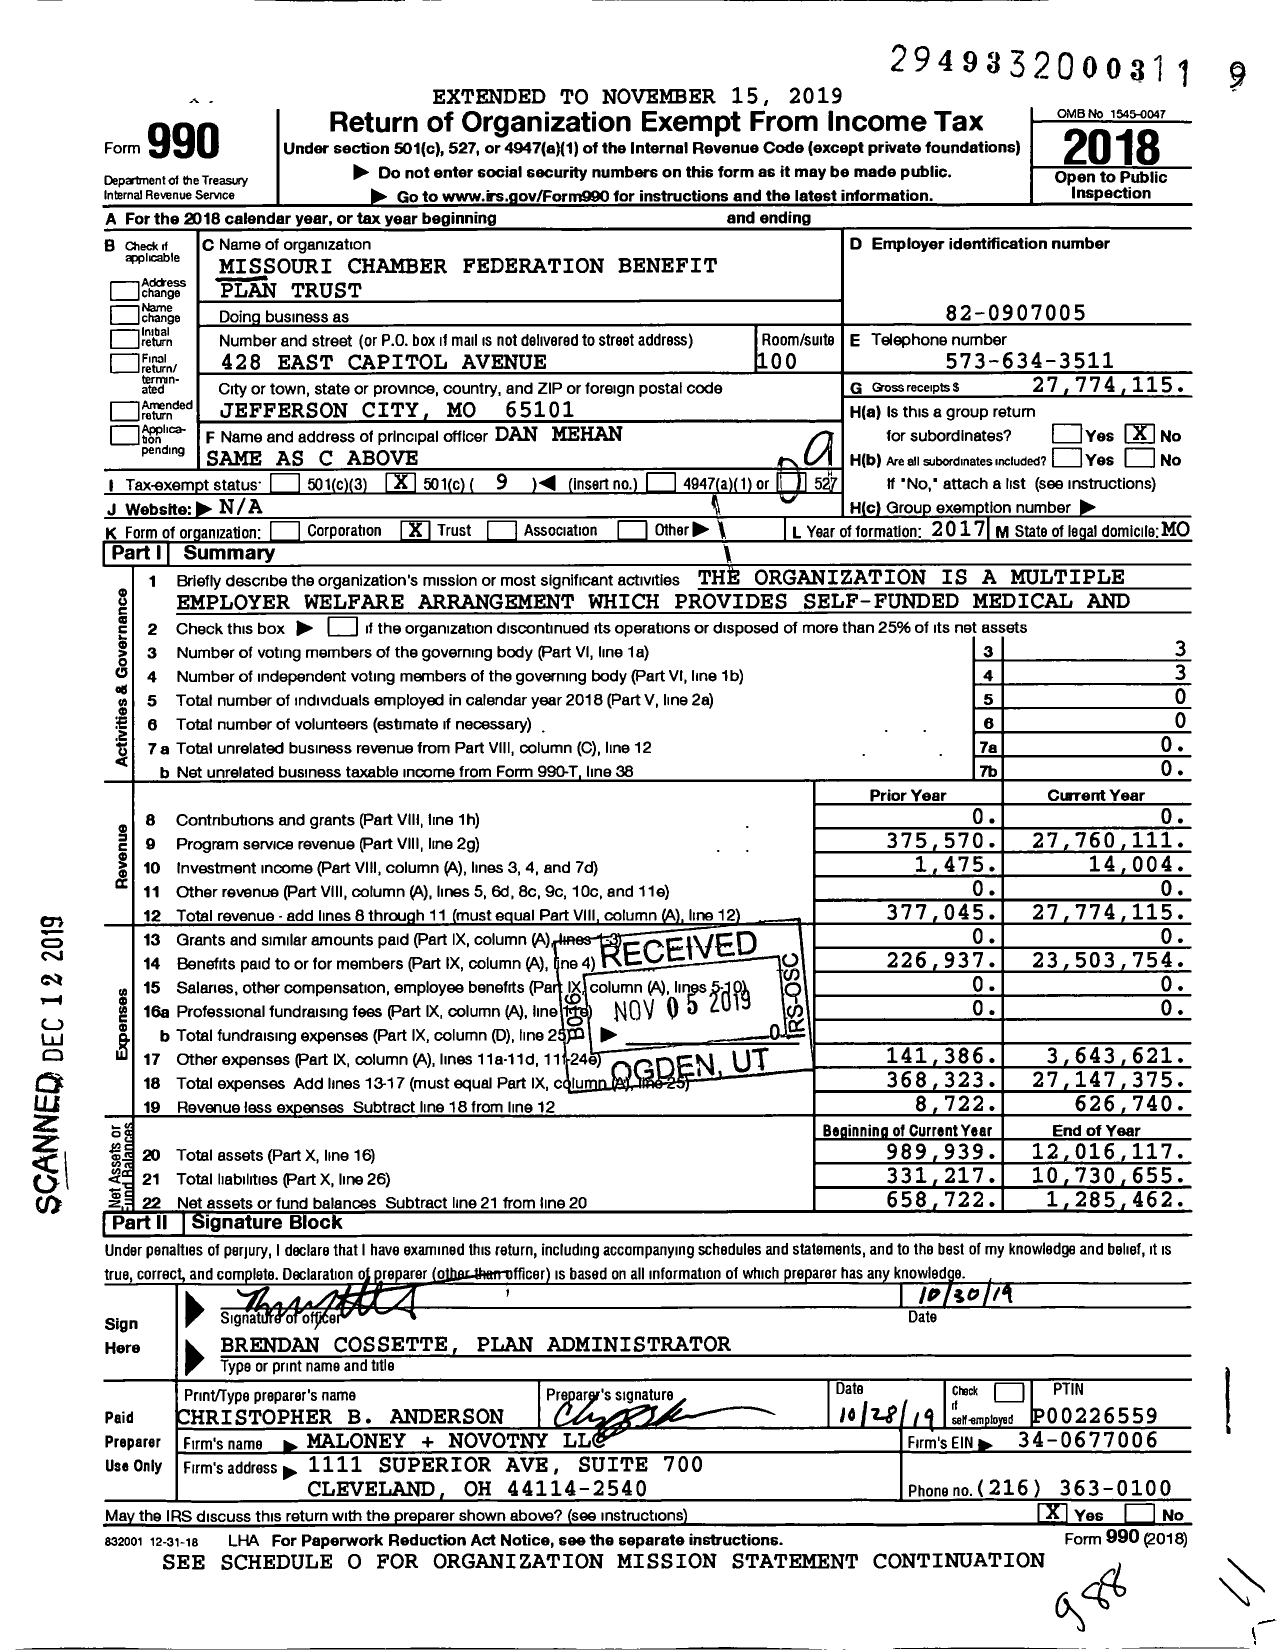 Image of first page of 2018 Form 990O for Missouri Chamber Federation Benefit Plan Trust